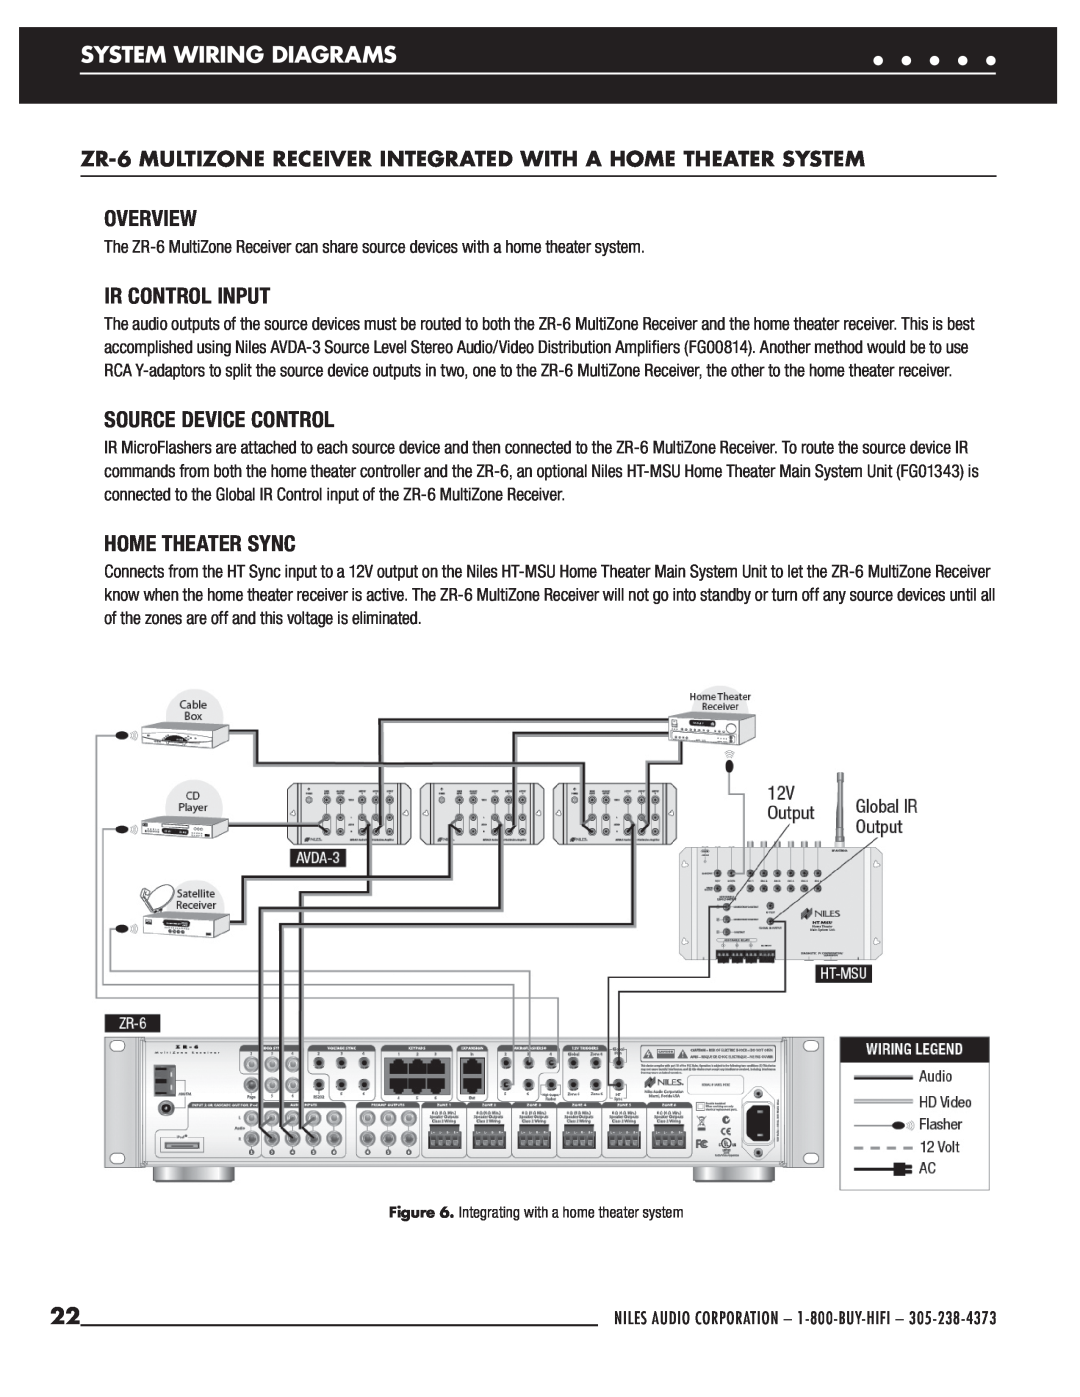 Niles Audio ZR-6 manual Ir Control Input, Home Theater Sync, System Wiring Diagrams, Overview, Source Device Control 